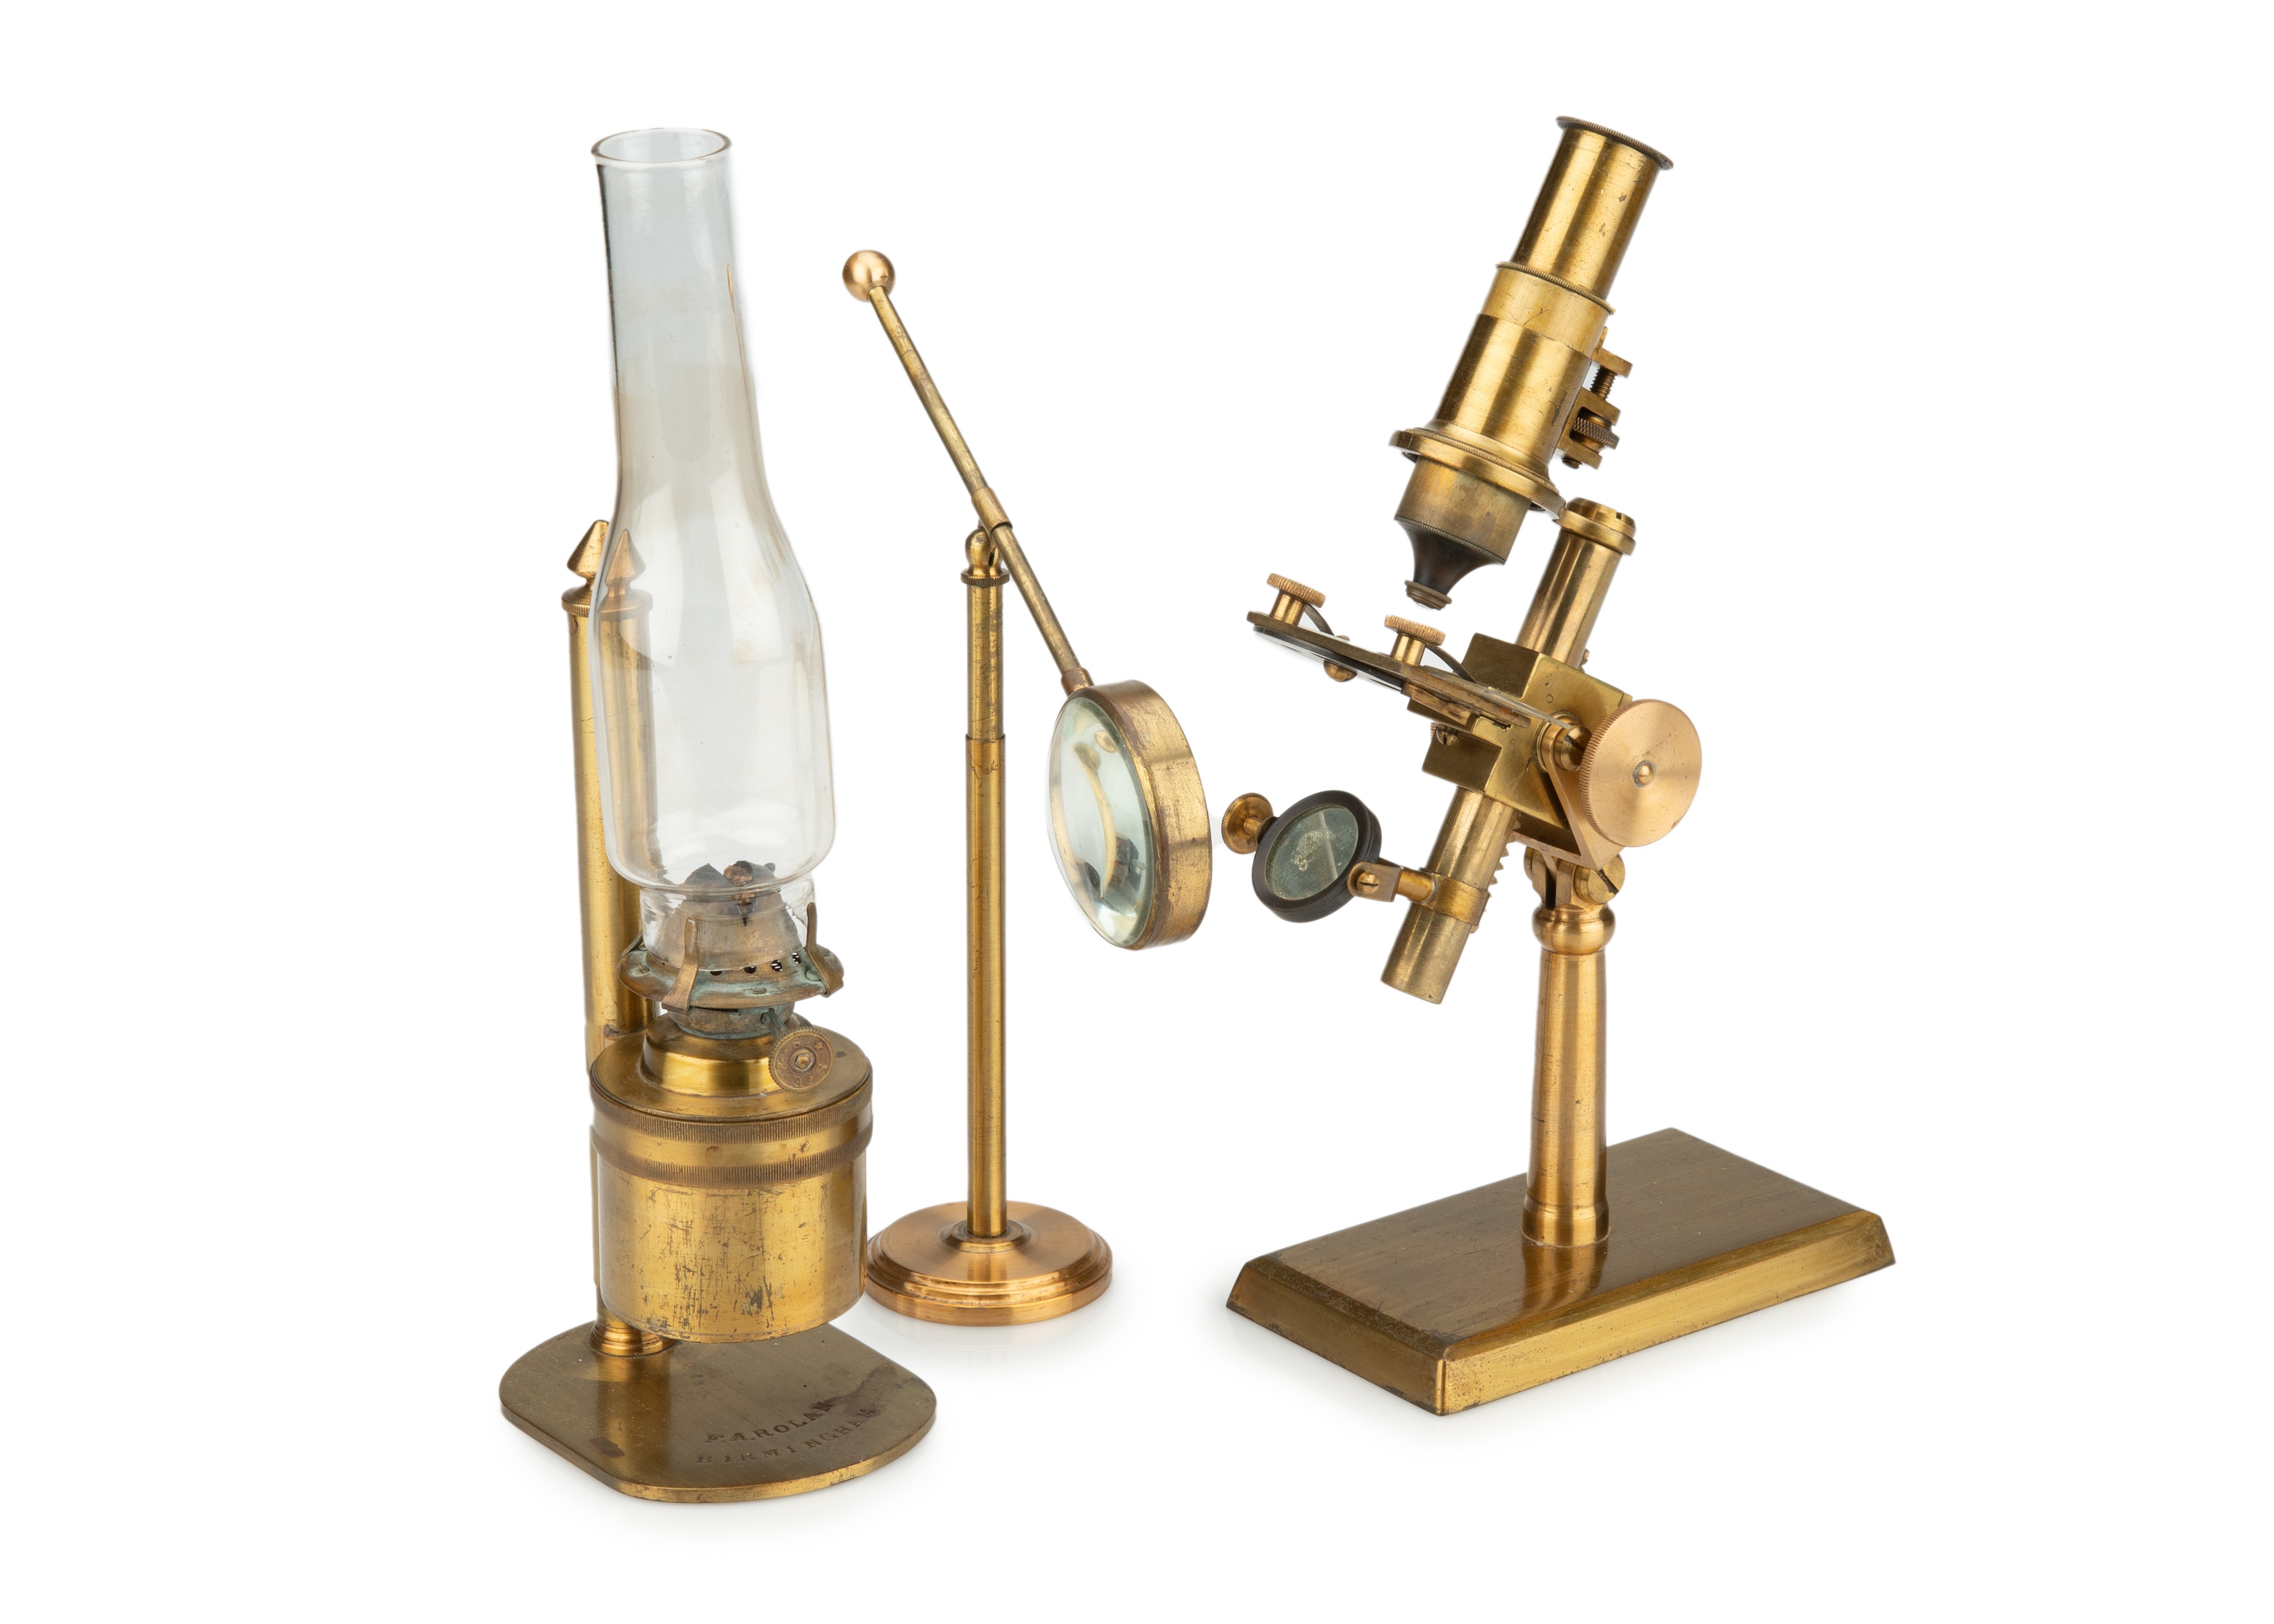 A Well Made Microscope By Rolan, Birmingham,